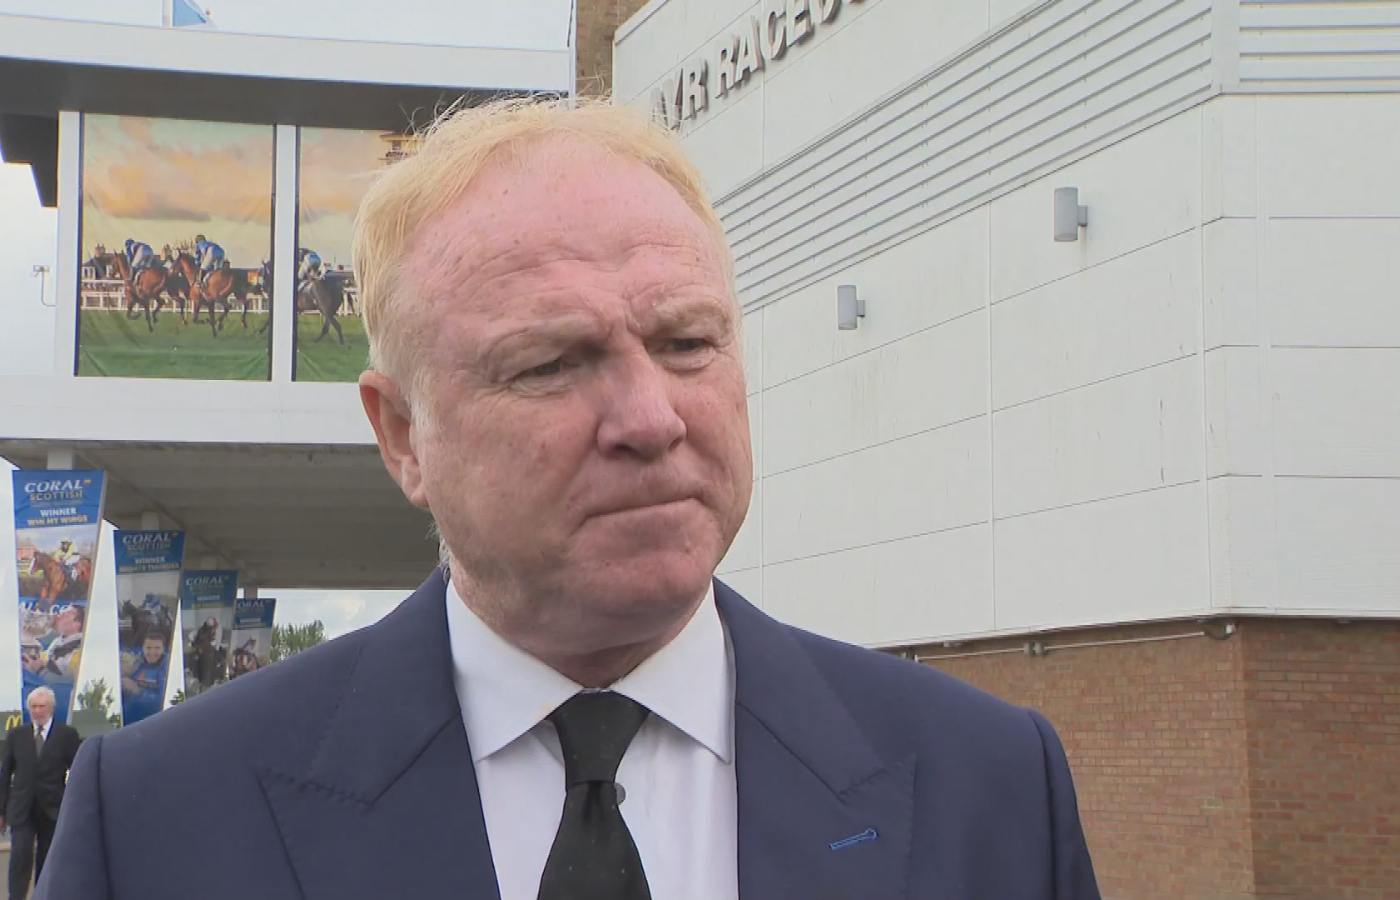 Former Scotland boss Alex McLeish said Brown's popularity 'crossed all divides'.